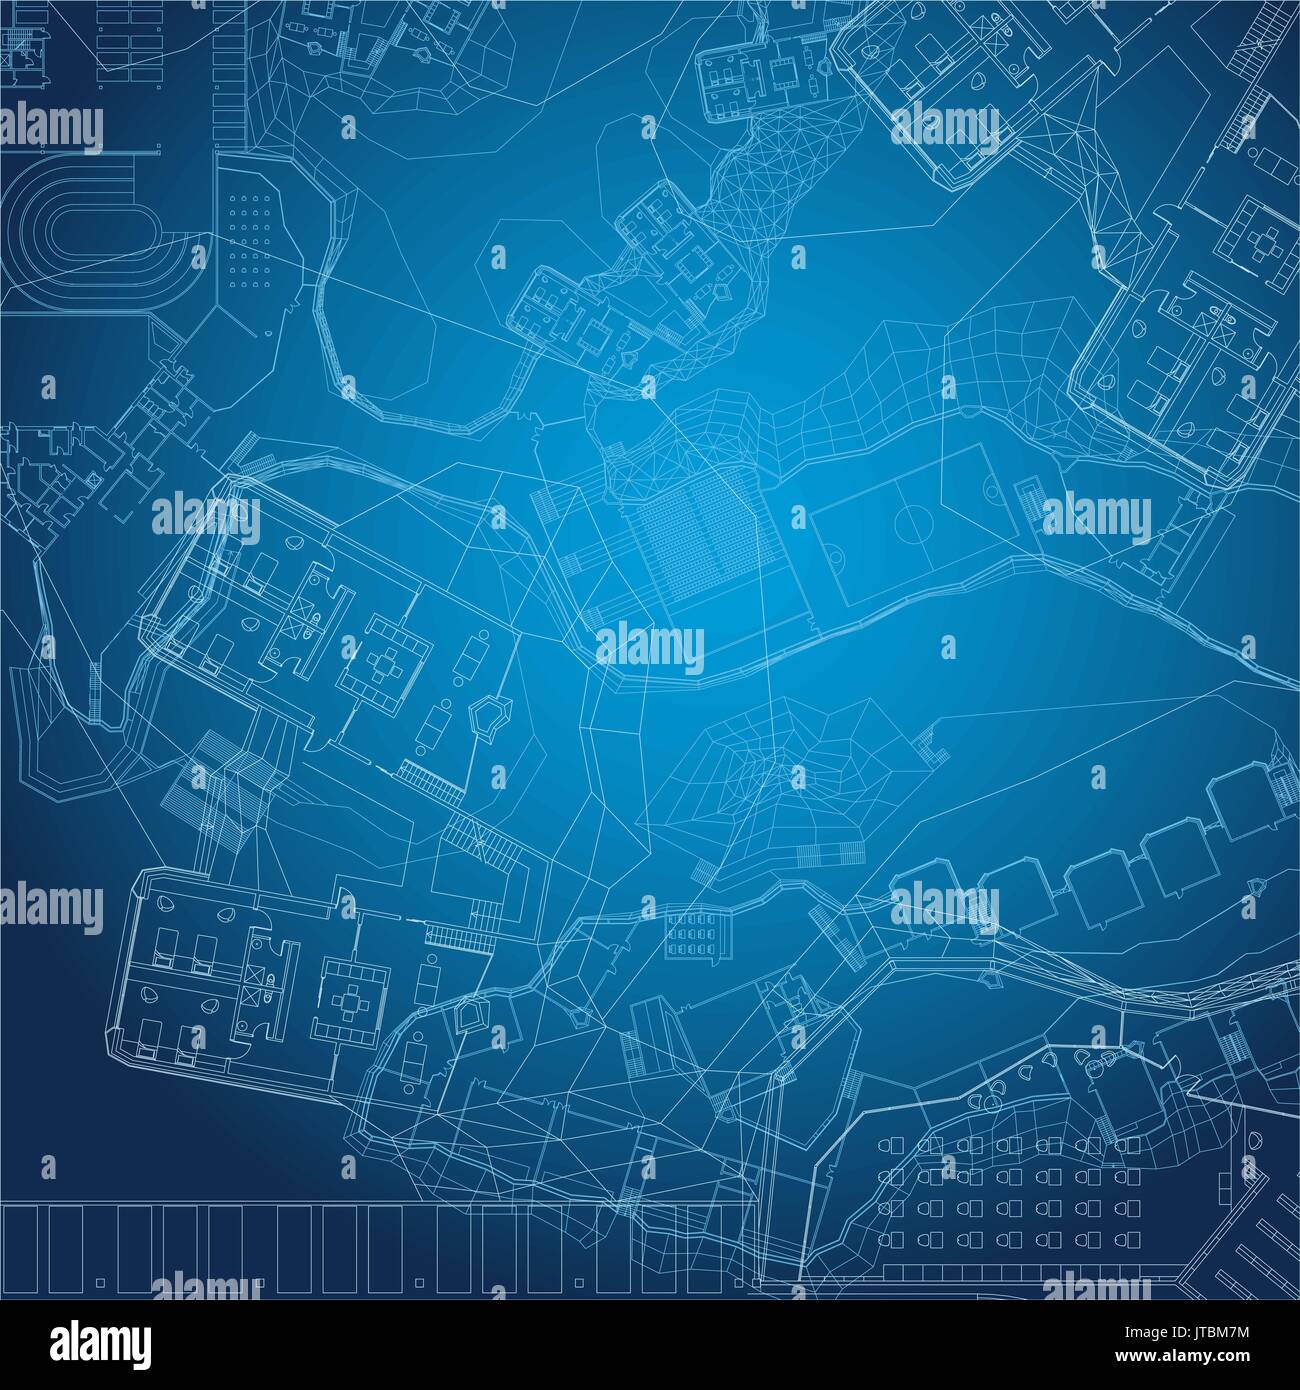 Blueprint. Architectural background. Stock Vector